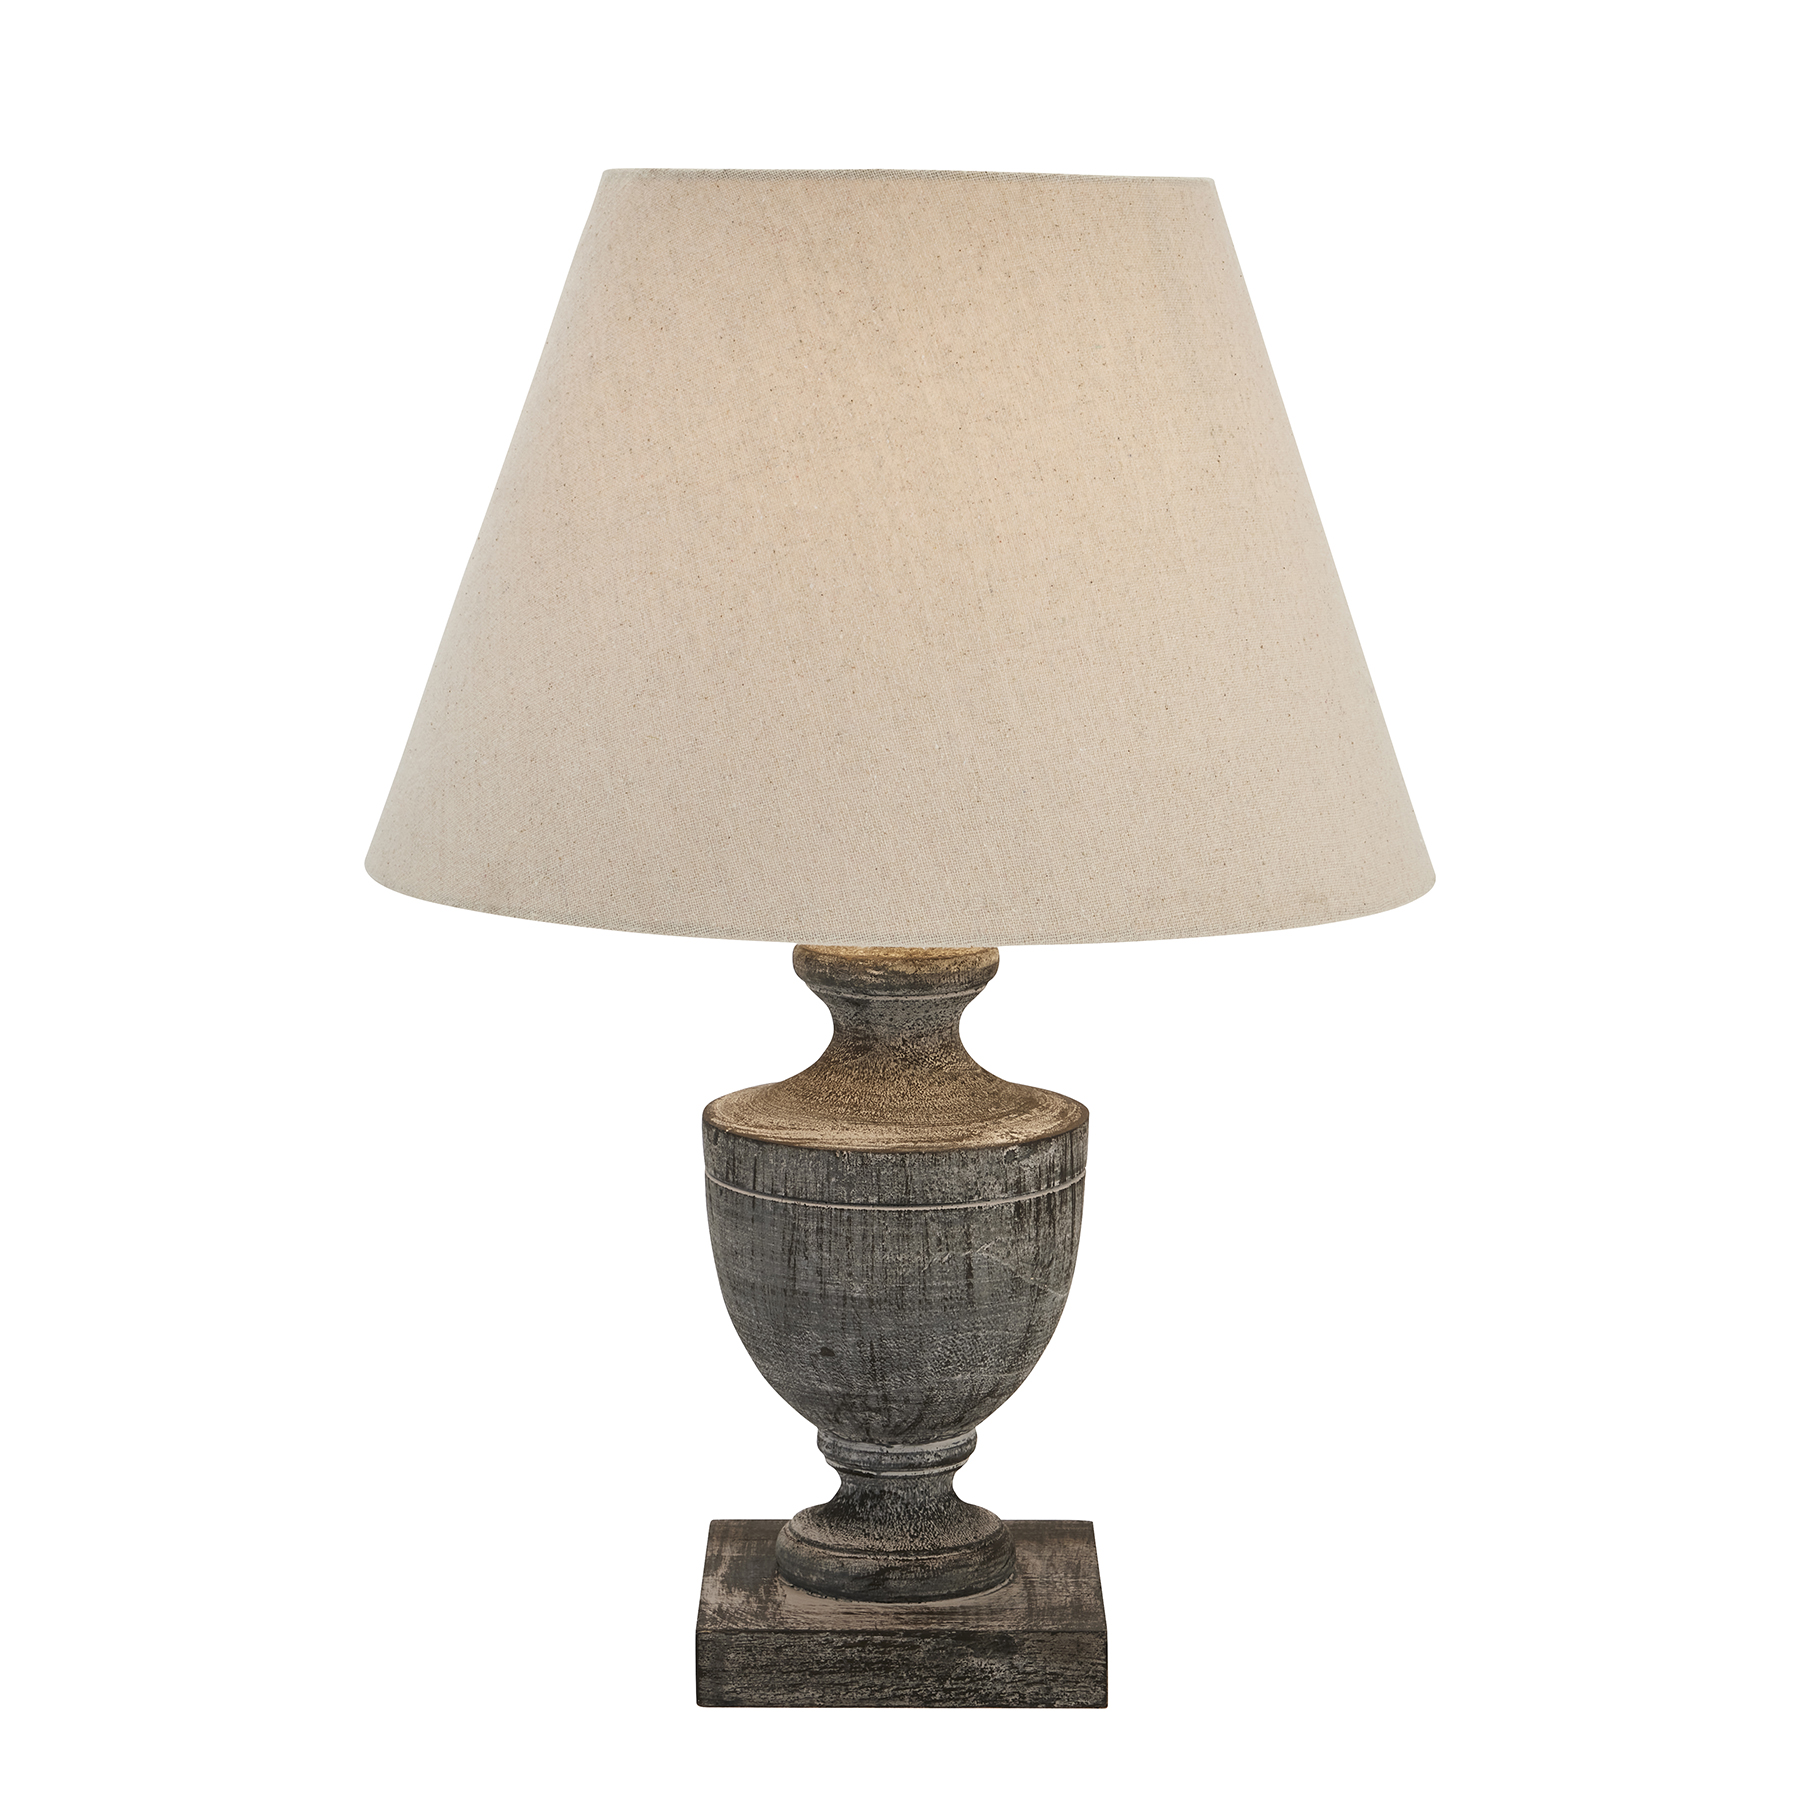 Incia Urn Wooden Table Lamp - Image 2